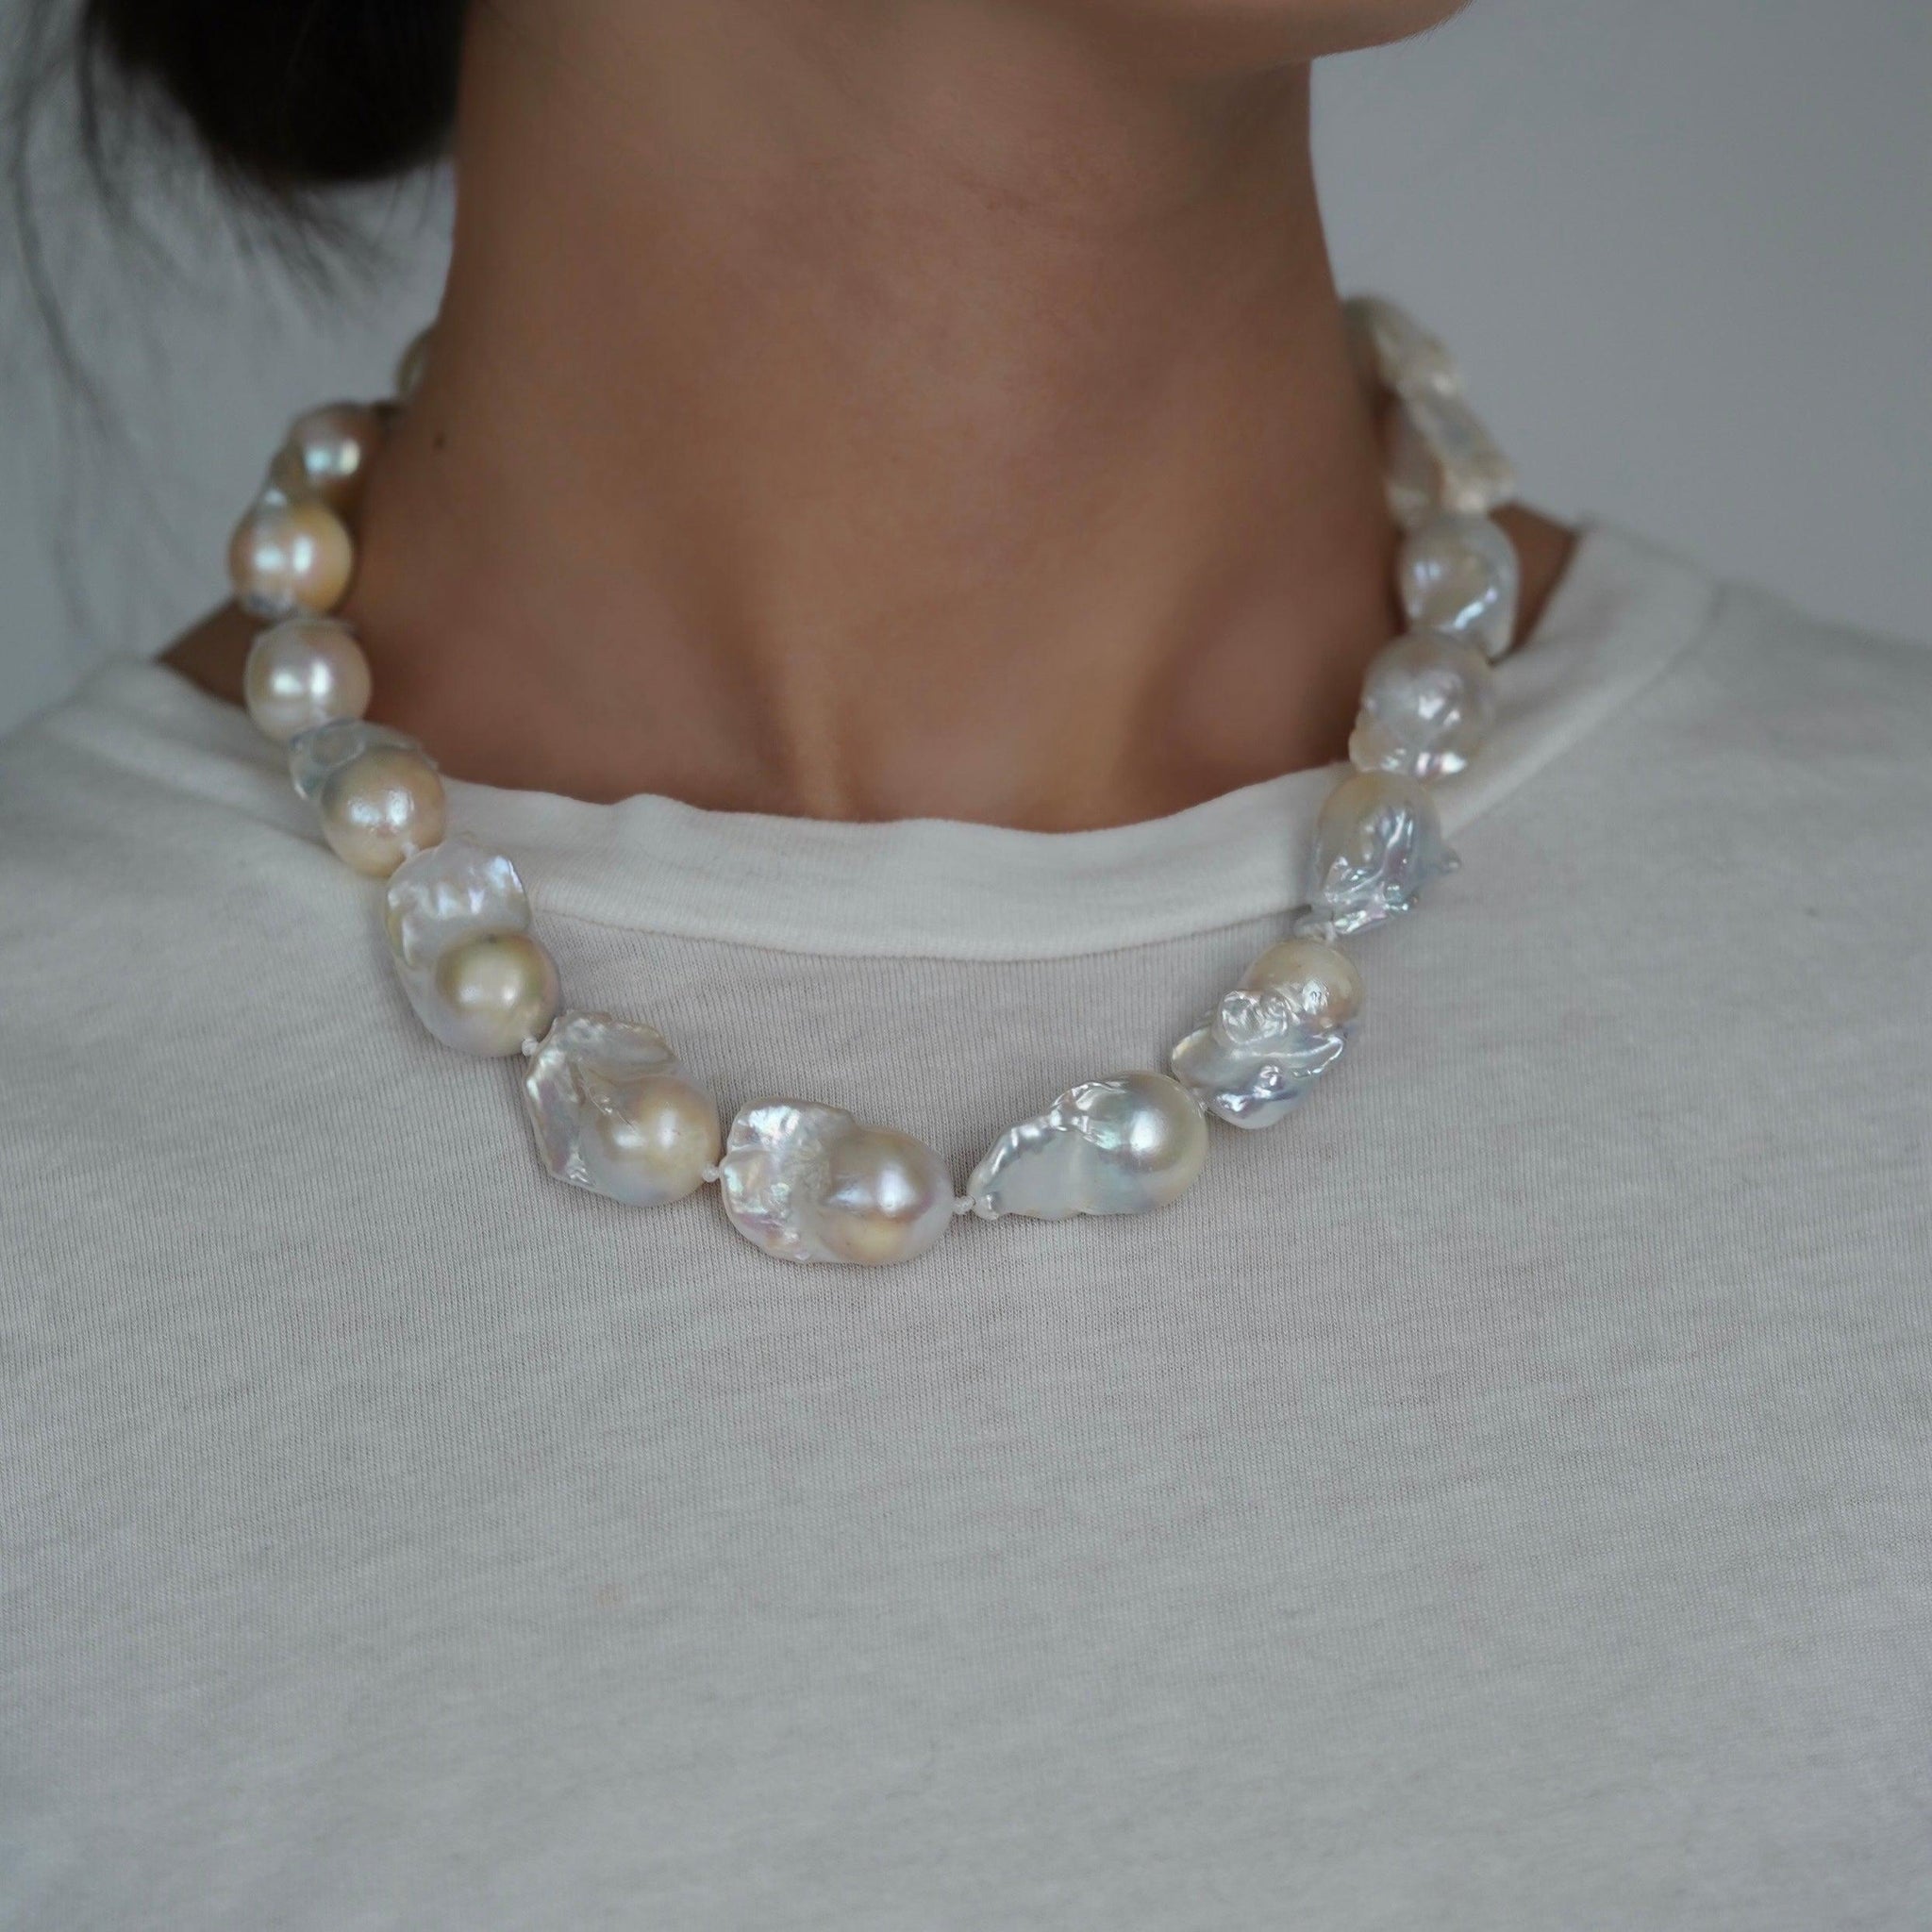 Freshwater Baroque Pearl Statement Necklace